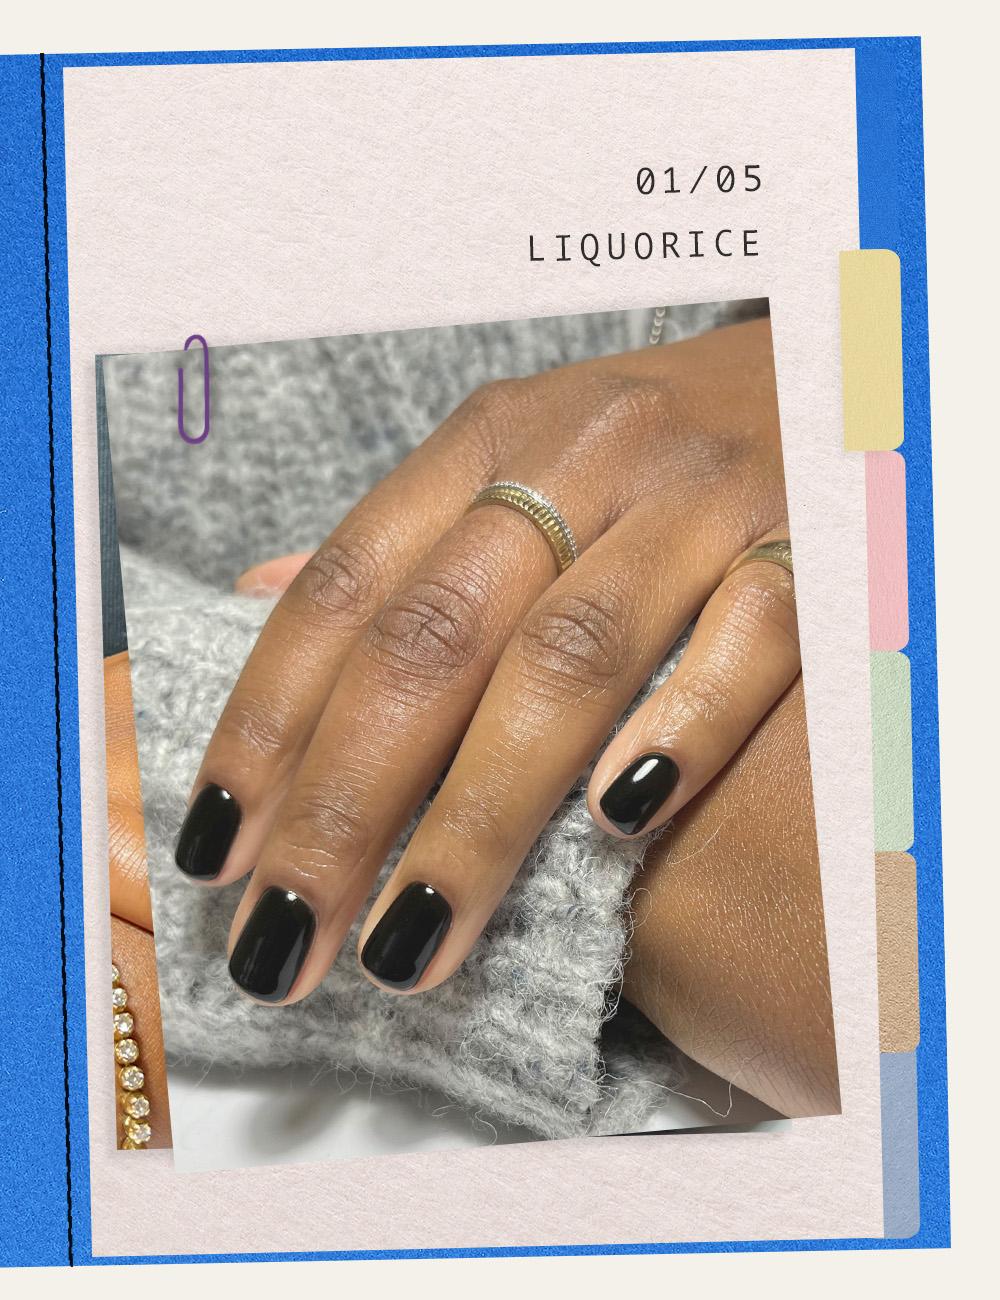 The Best Nail Trends of the Moment According to Julia Diogo Liberty image